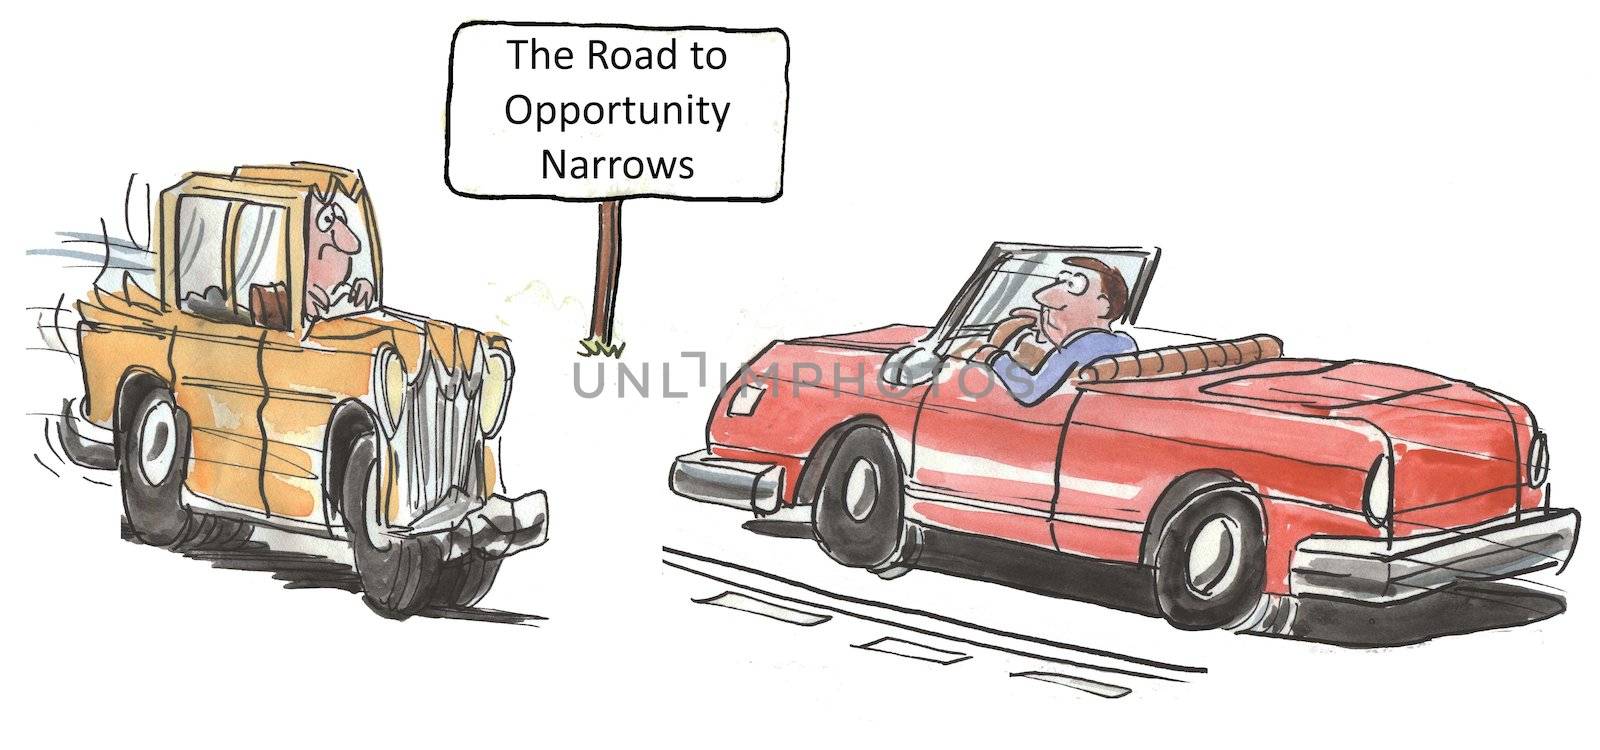 The road to opportunity narrows.